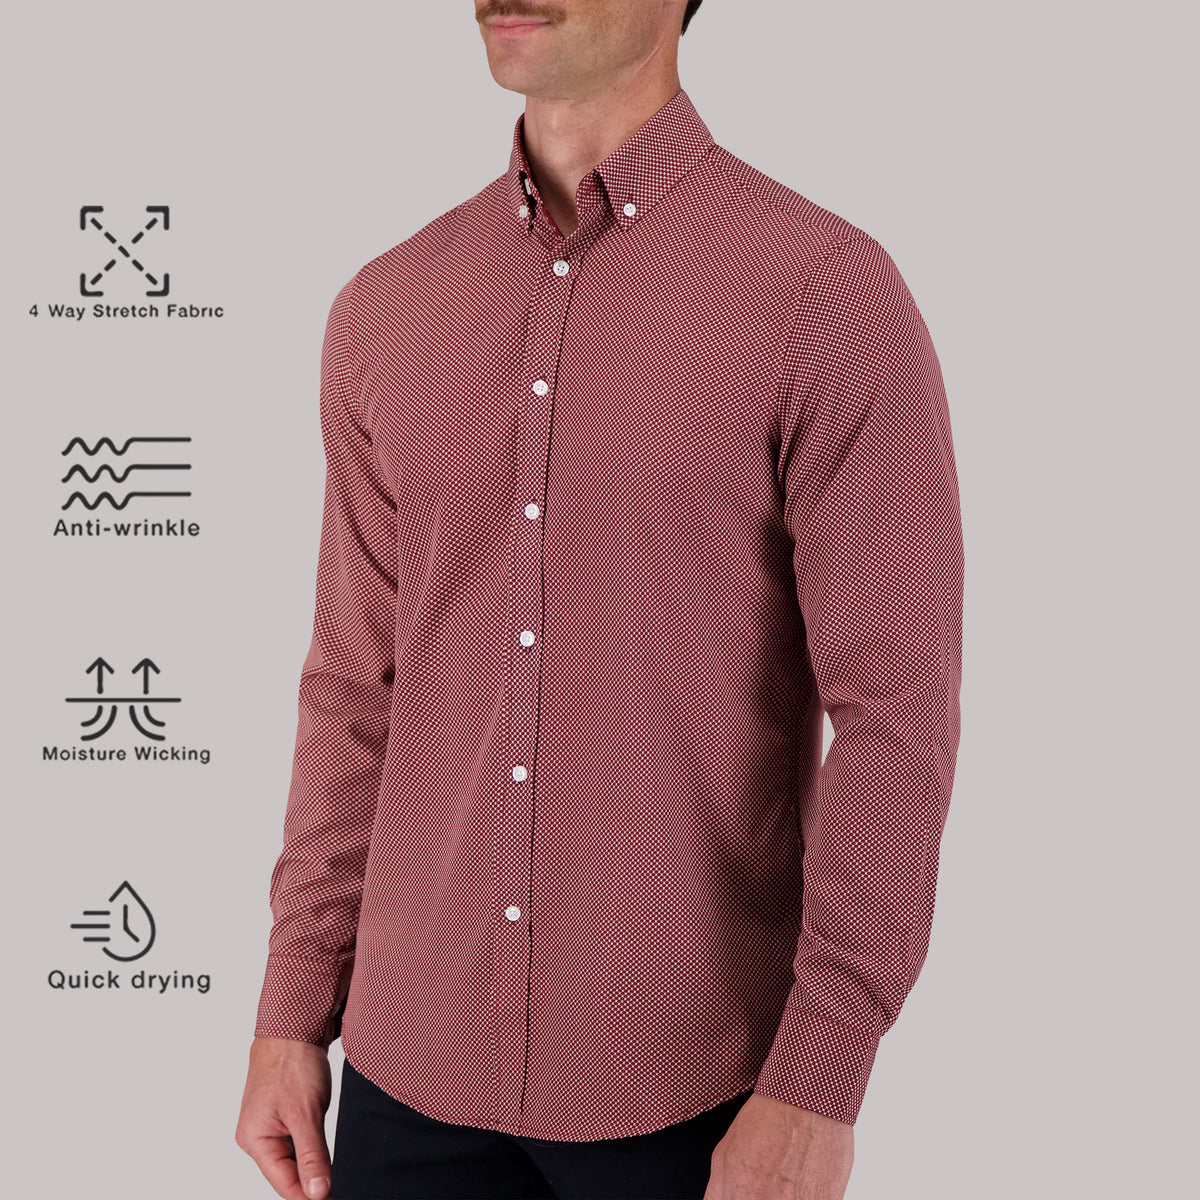 Model Side View of Long Sleeve 4-Way Sport Shirt with Geometric Print in Burgundy with description of material being 4 way stretch fabric, anti-wrinkle, moisture wicking and quick drying